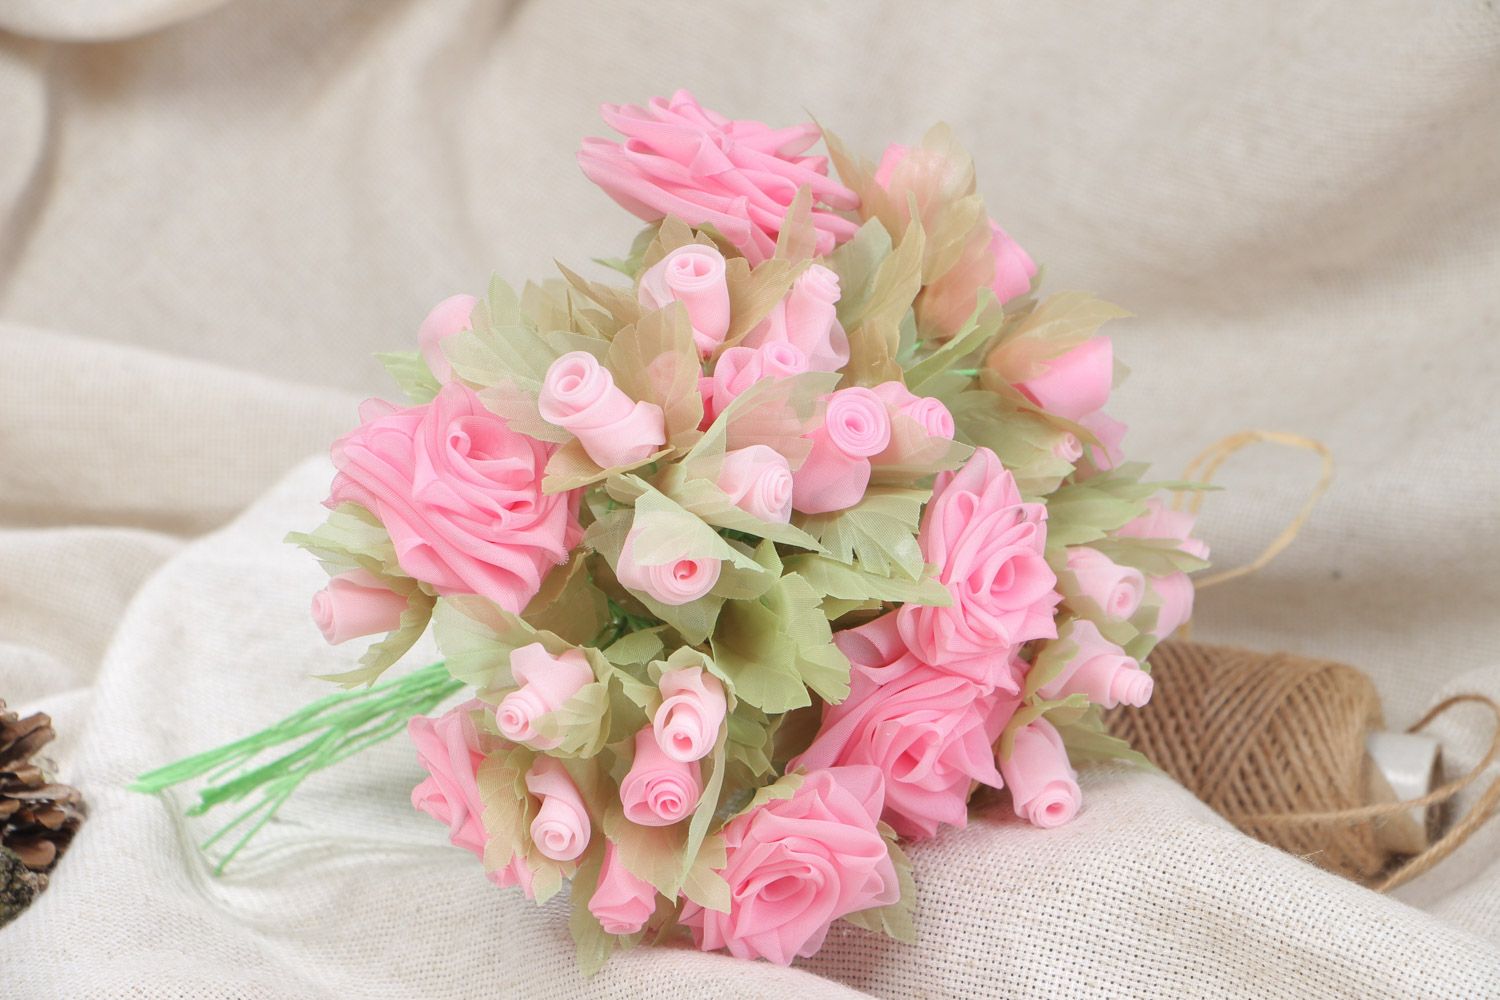 Handmade beautiful chiffon bouquet of pink roses for a home decor photo 1